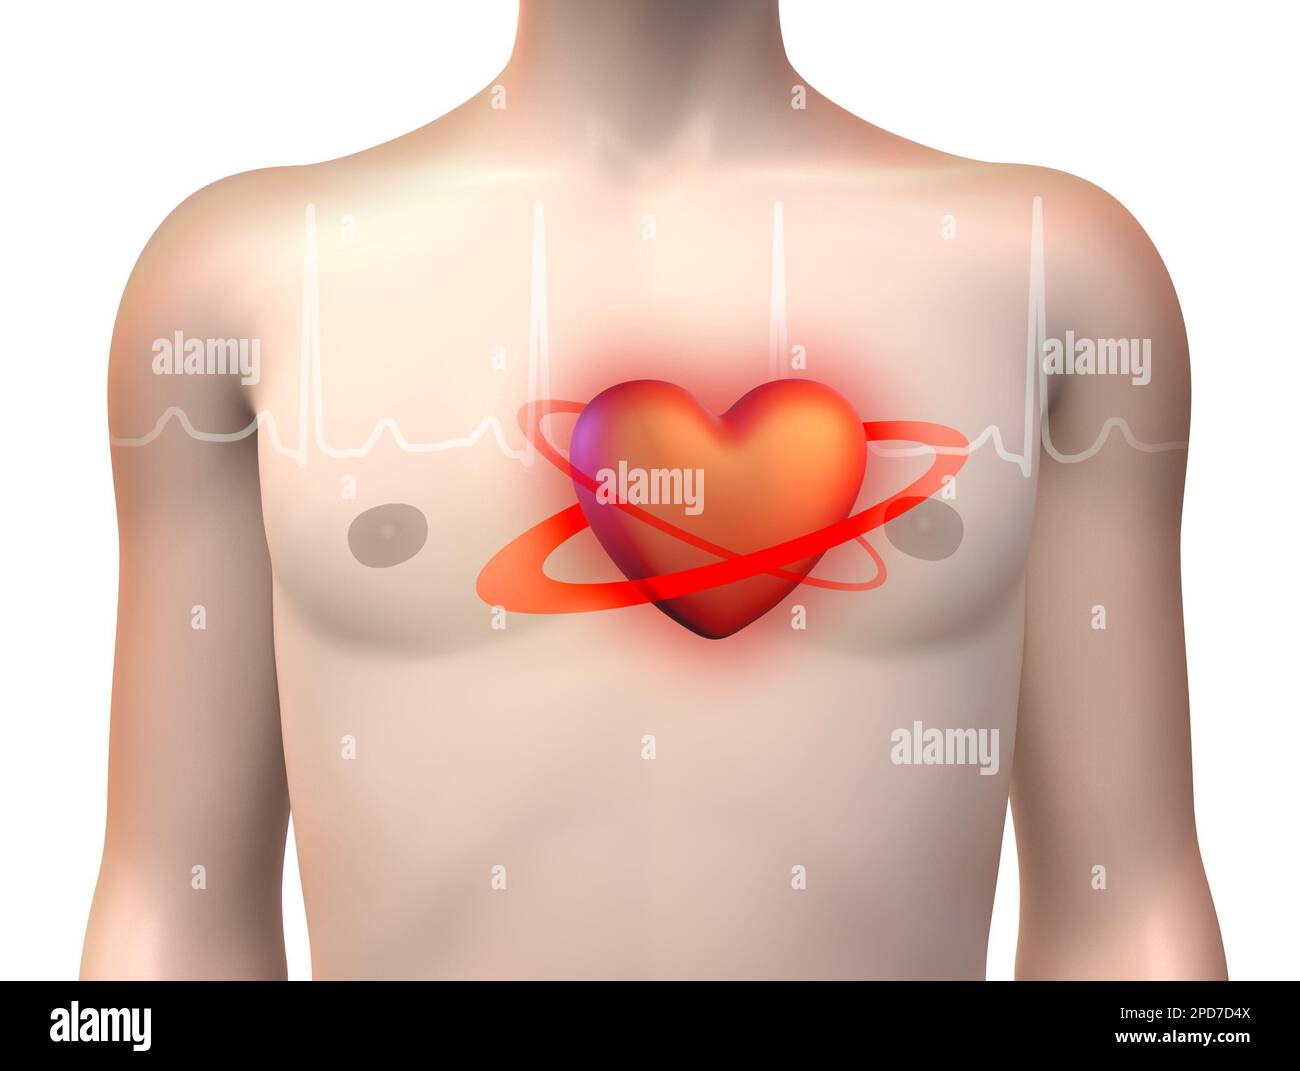 Human body with a stylized heart and an ECG line. Digital illustration, 3D render. Stock Photo